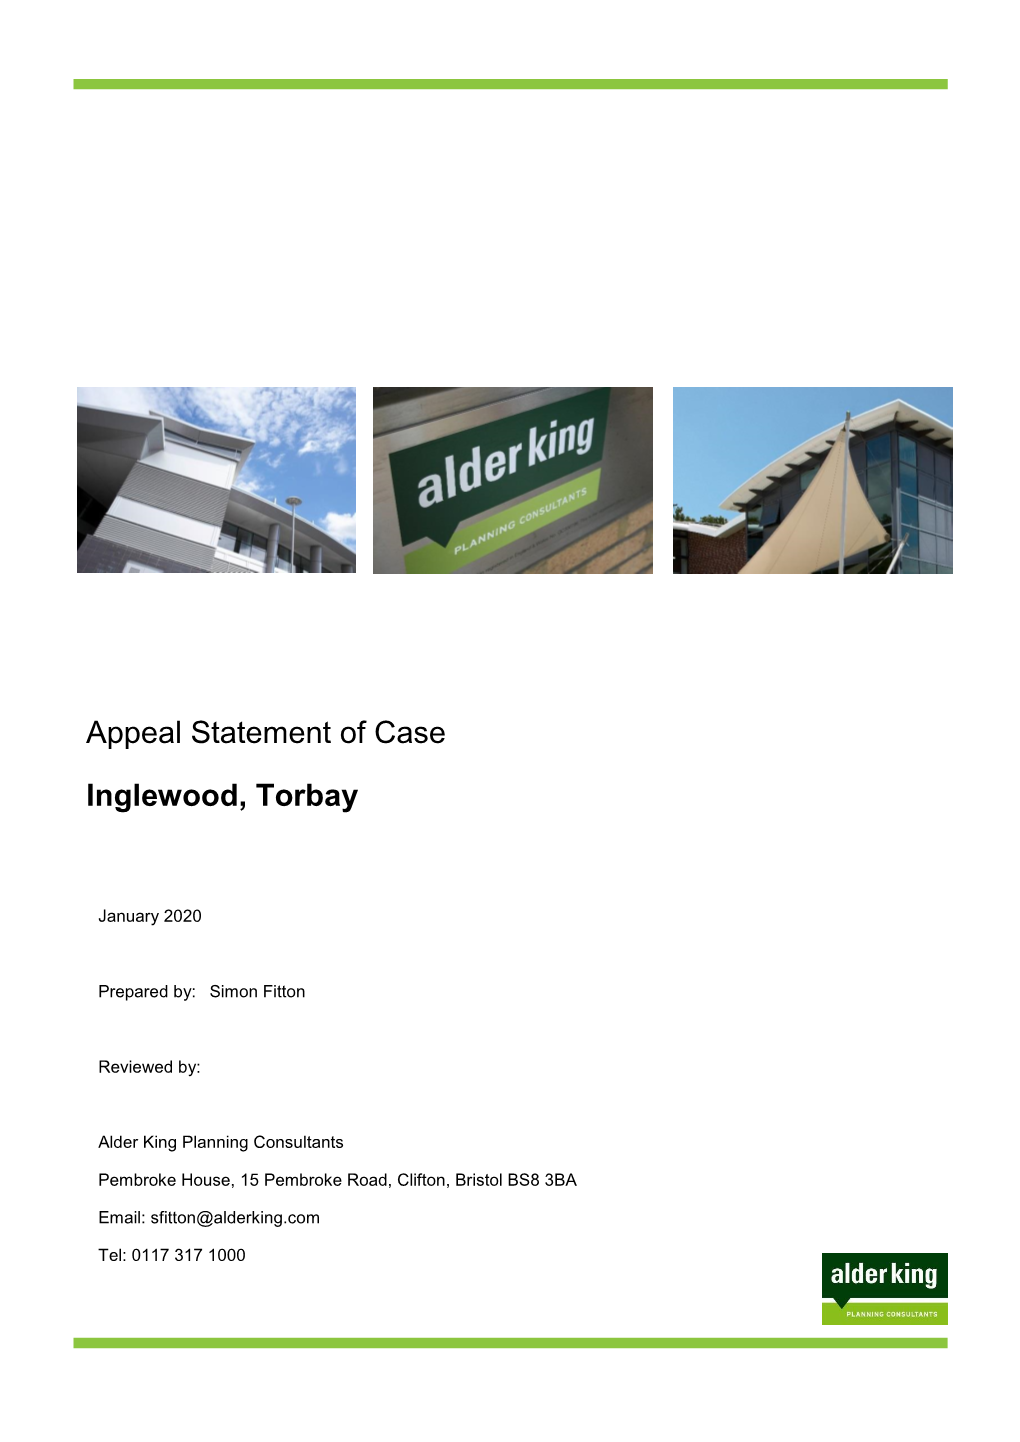 Appeal Statement of Case Inglewood, Torbay